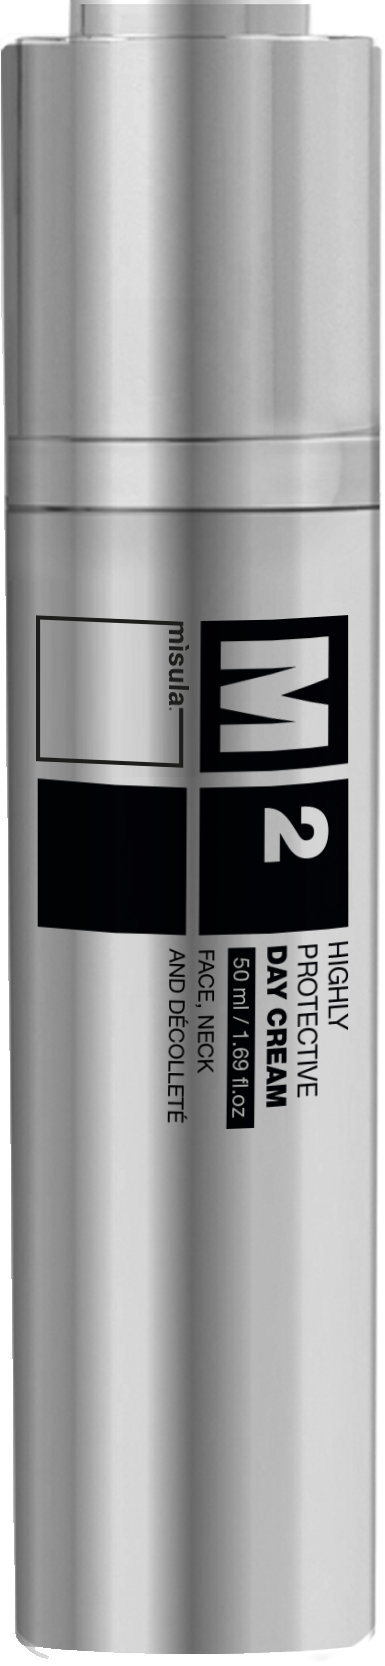 M2 Highly protective day cream face, neck and décolleté